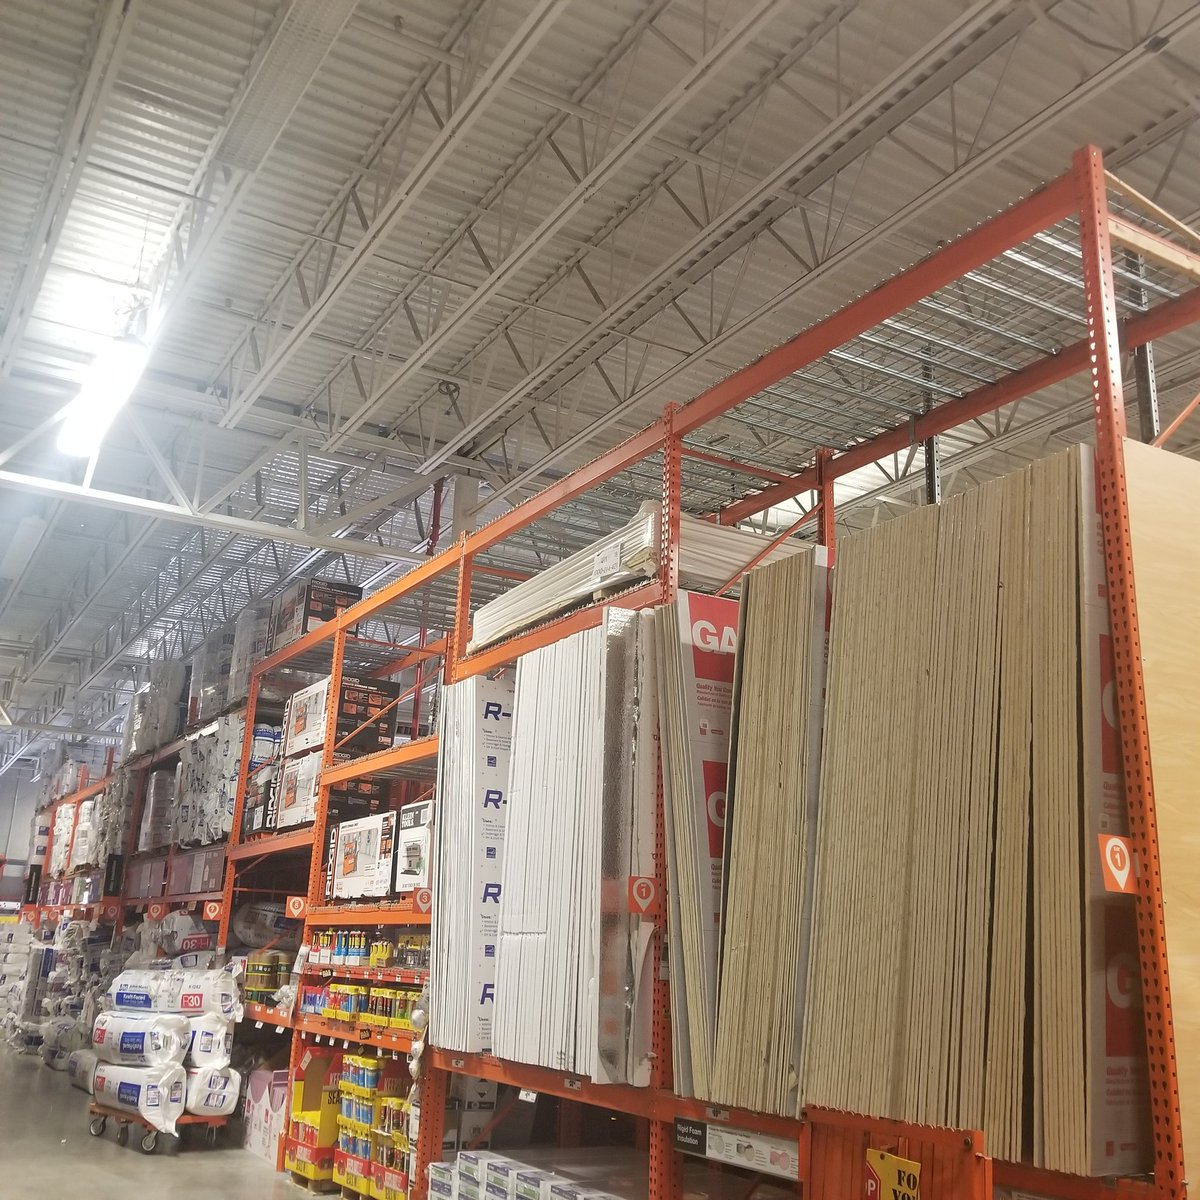 #SFLOHORG Great job team #6872 on the overhead organization. Day 3 is about to begin. #letdothis @wcork19 @JacobRobertsTHD @LeoT_homedepot